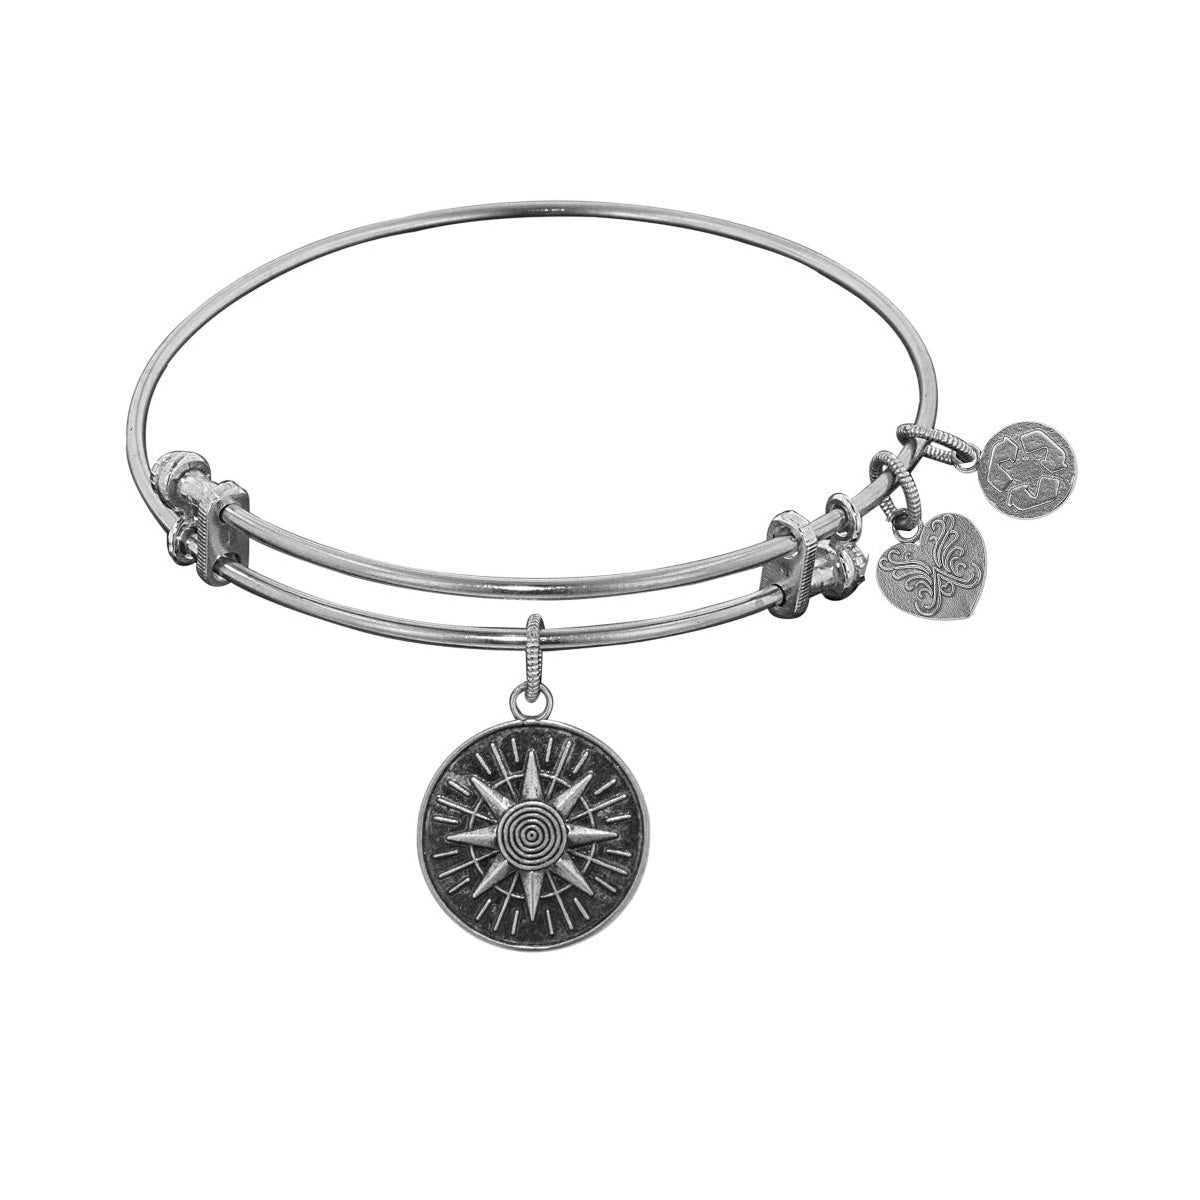 Smooth Finish Brass Compass Angelica Bracelet, 7.25" fine designer jewelry for men and women